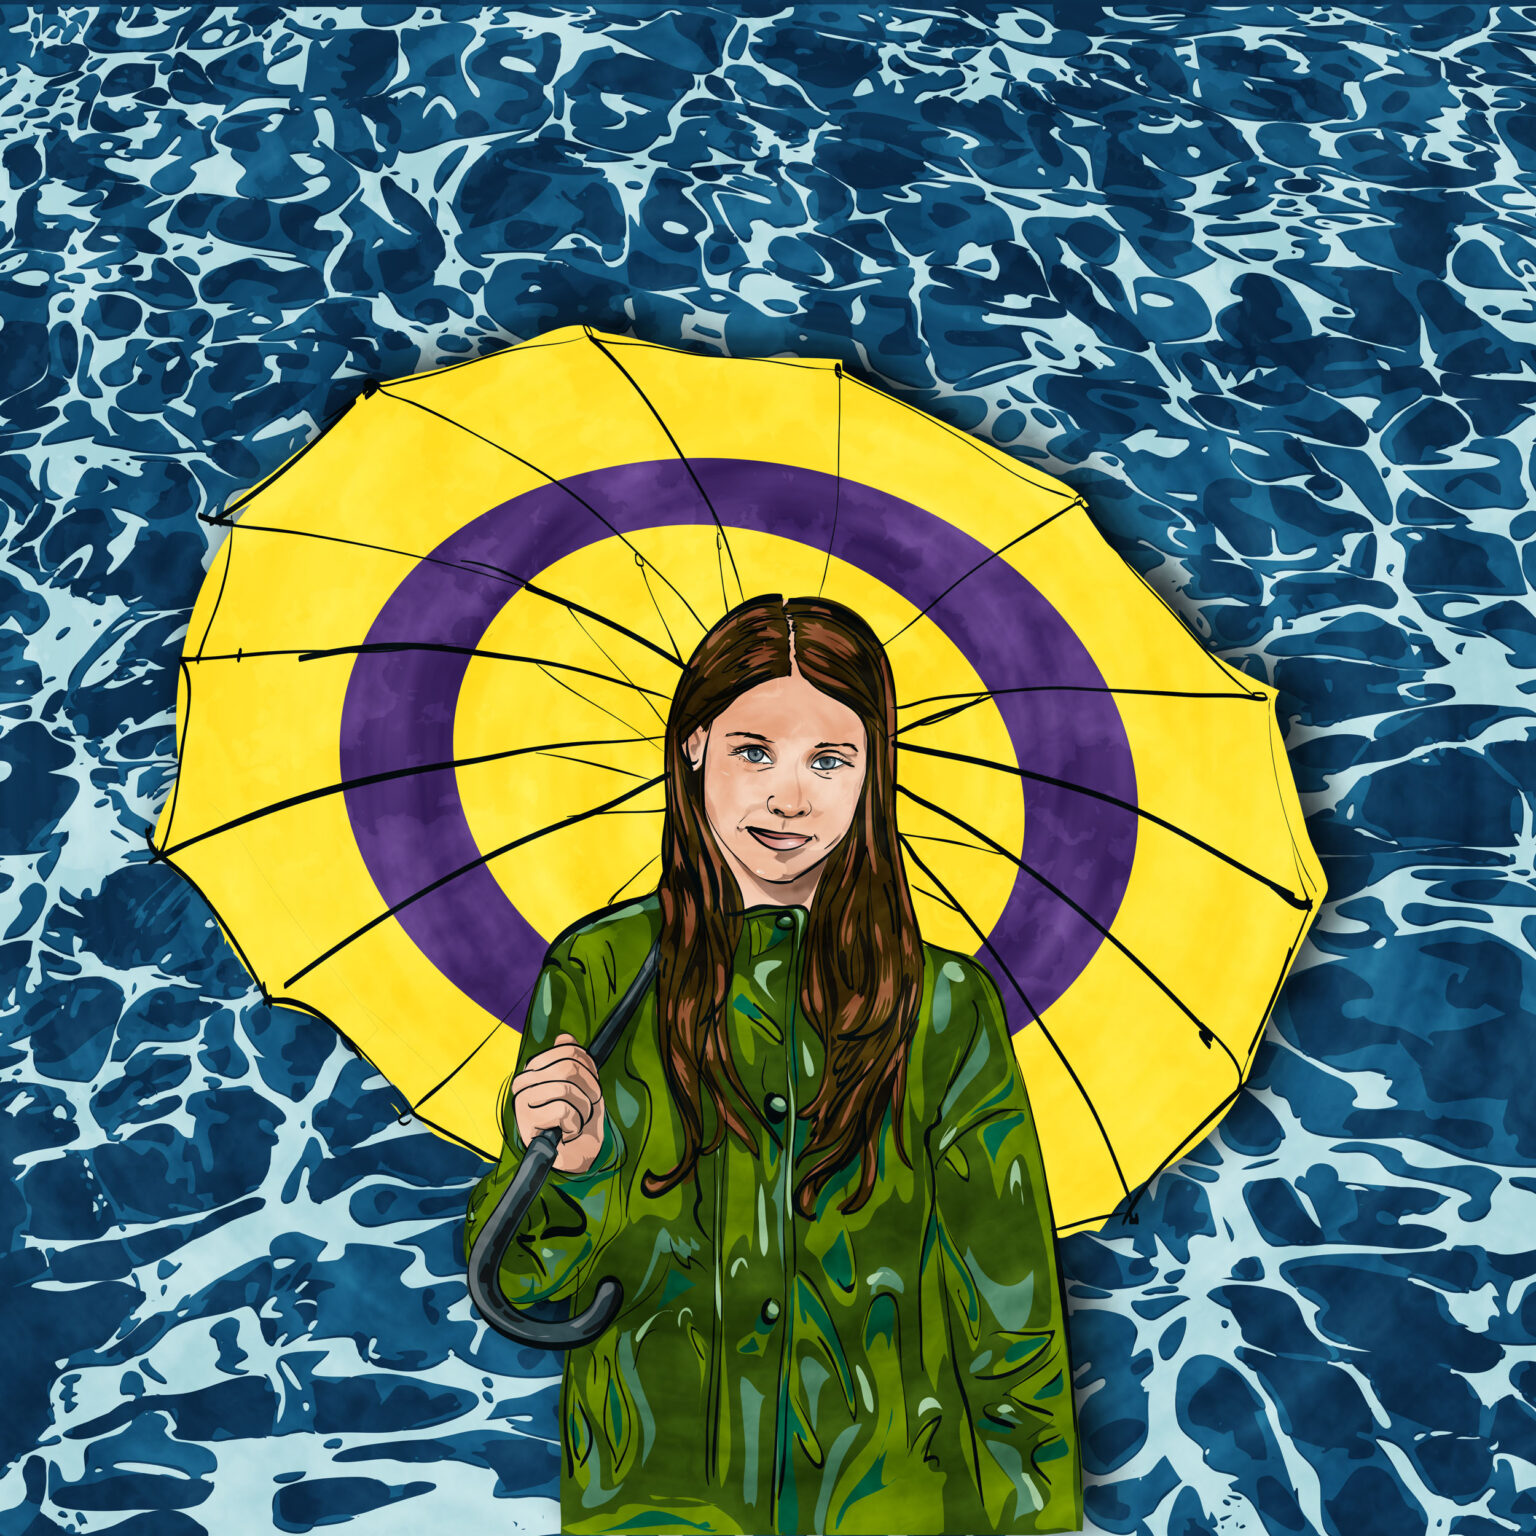 A drawing of a girl holding an umbrella with the intersex flag